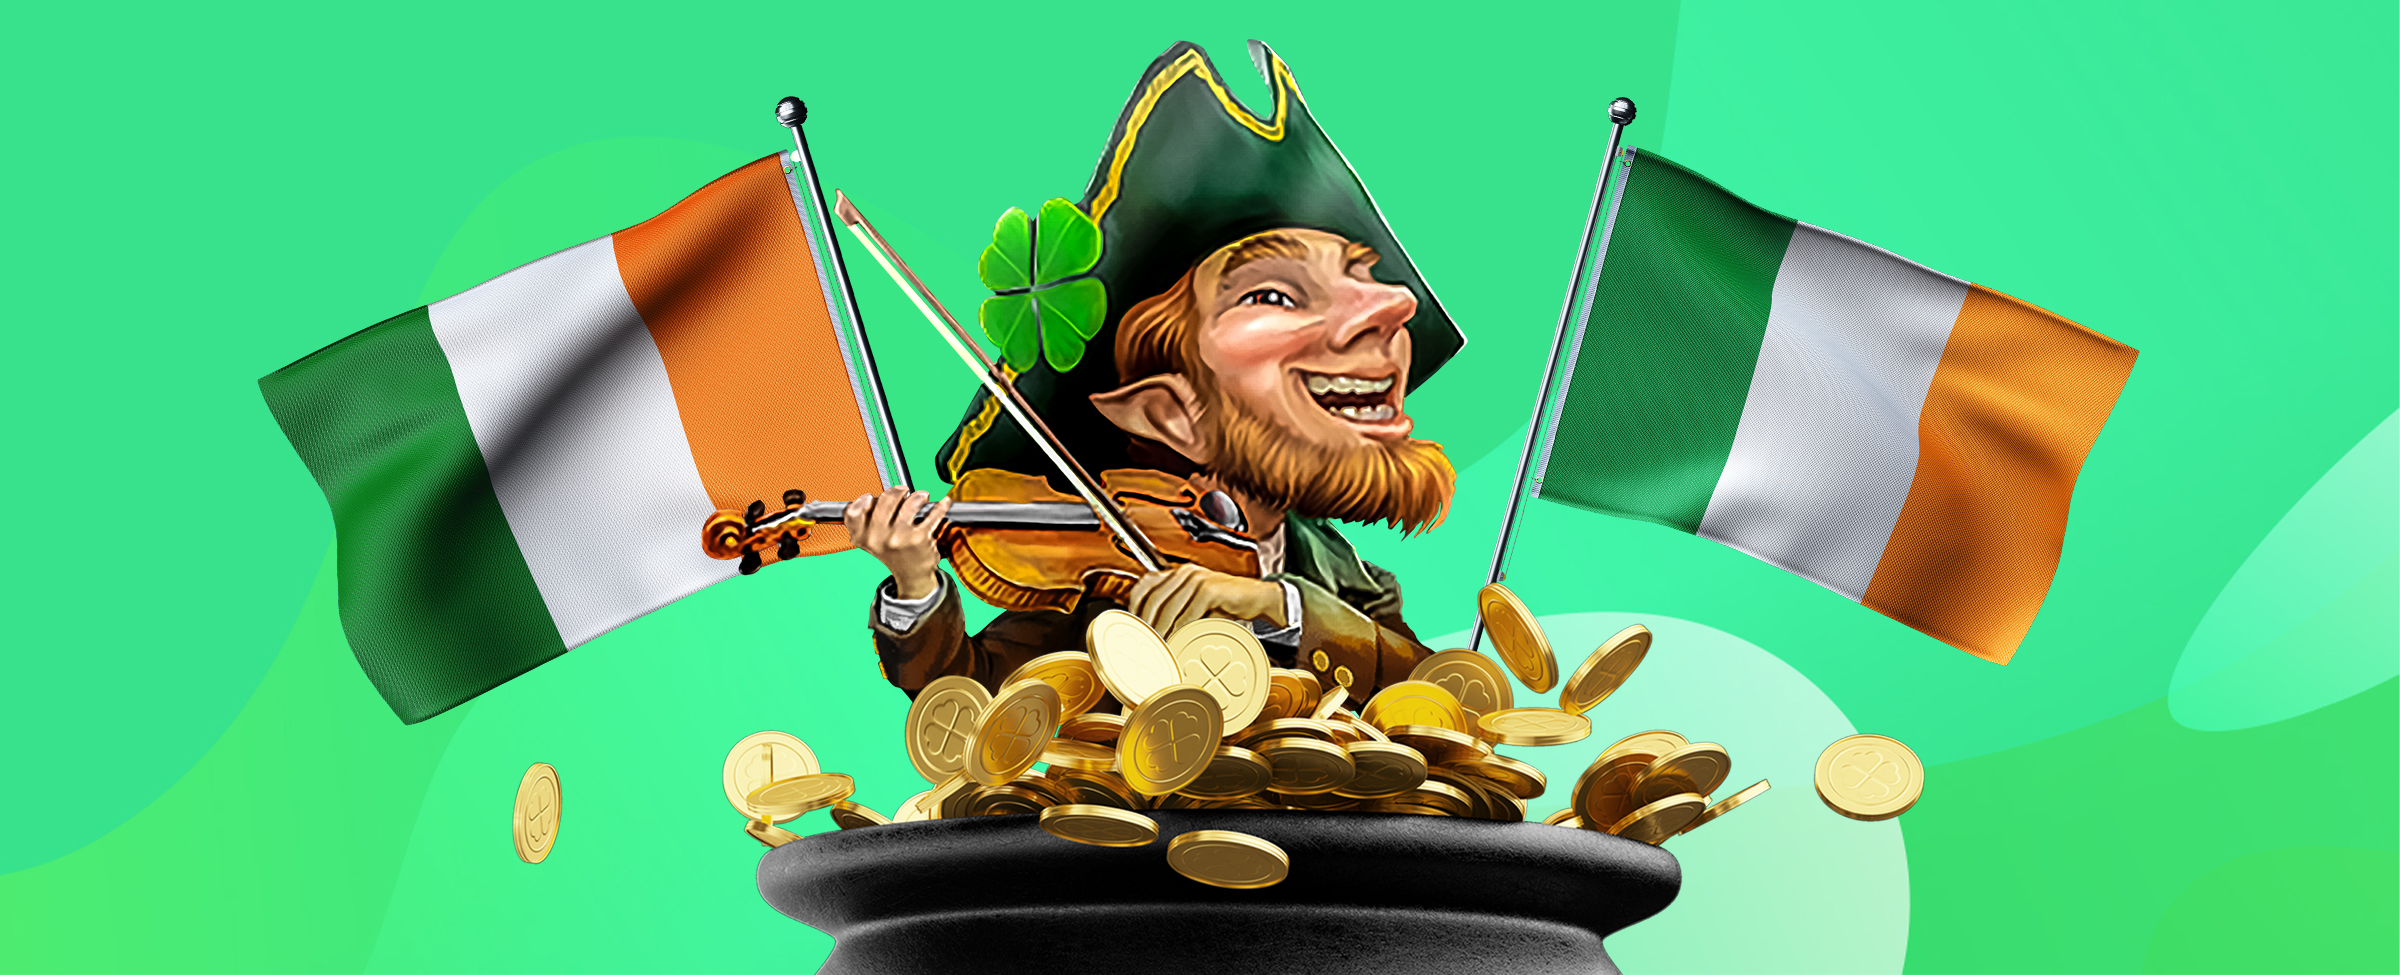 The 3D-animated central character from the SlotsLV slot game, Leprechaun Legends, is depicted wearing a green hat with a four-leaf clover, playing a fiddle, coming out of an oversized pot of gold in between two Irish flags.